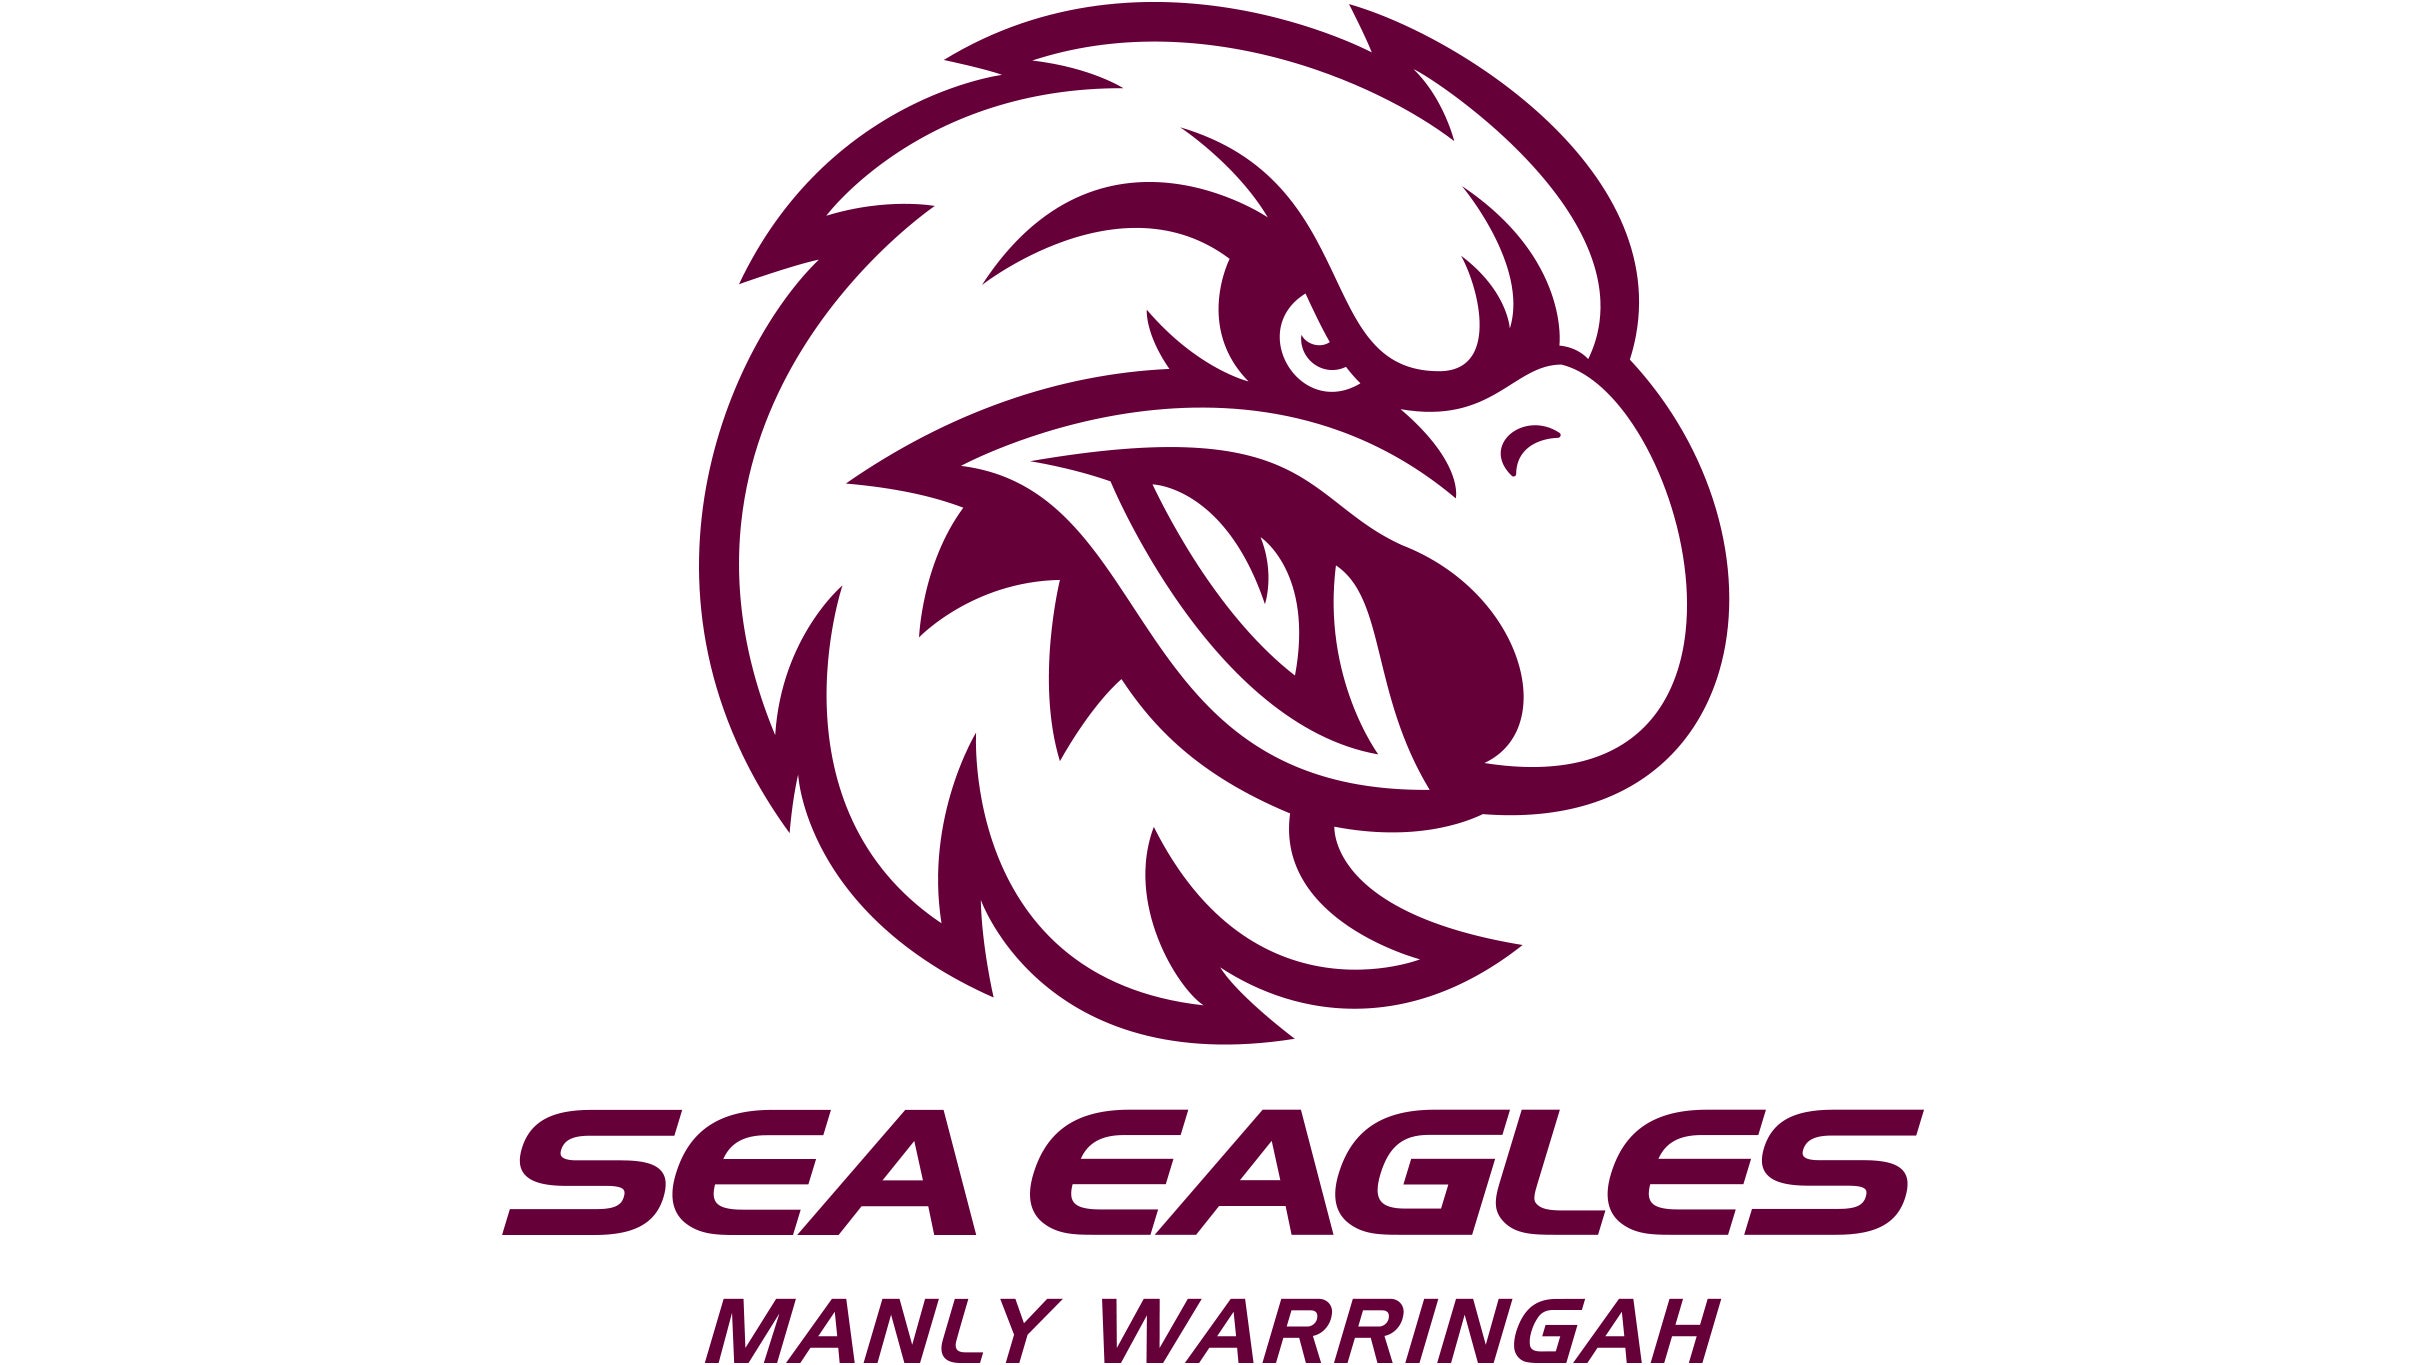 Manly Warringah Sea Eagles v Knights in Brookvale promo photo for Sea Eagles Members presale offer code